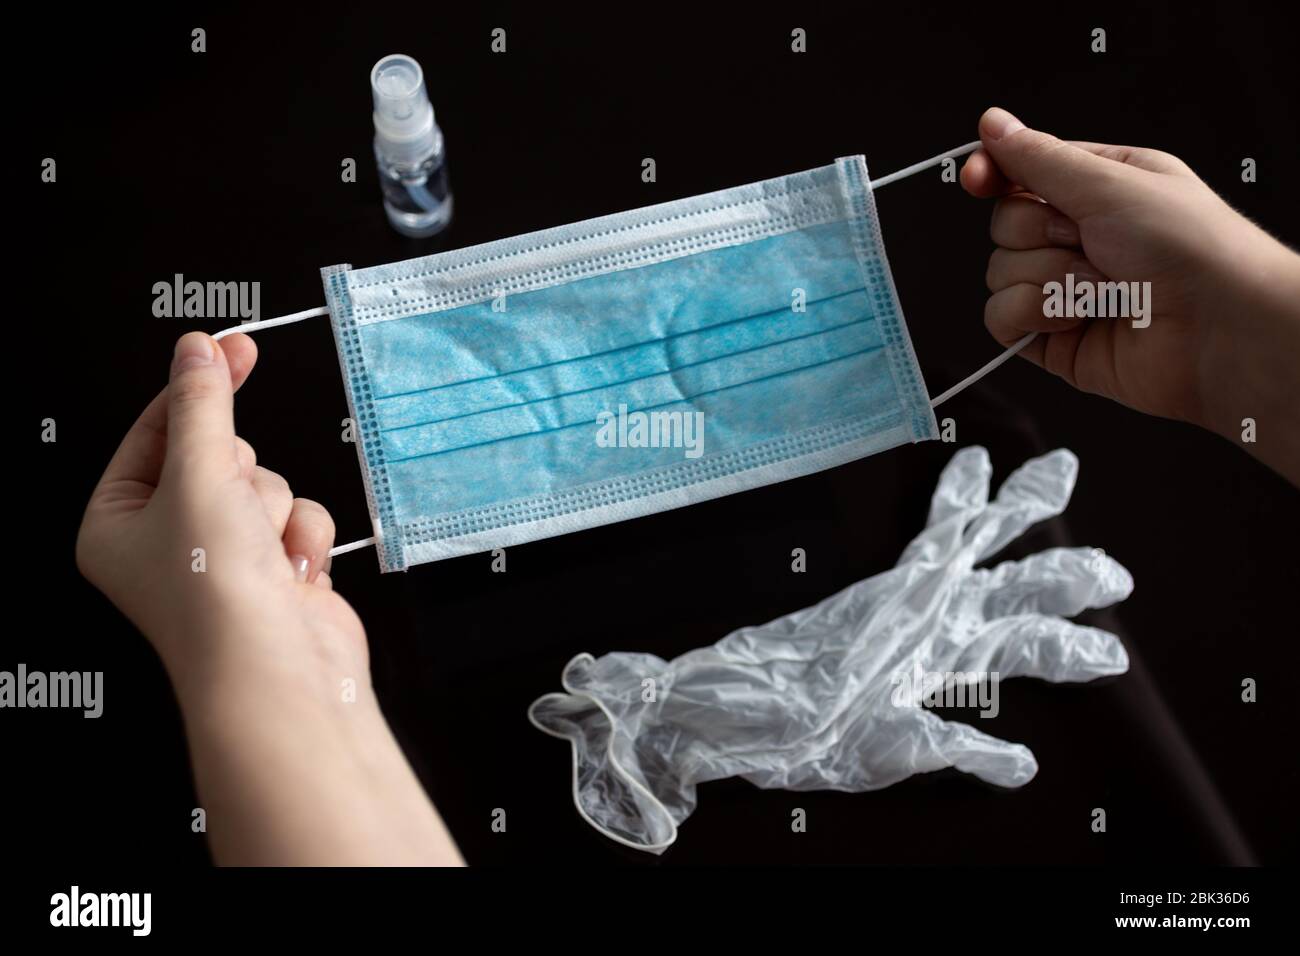 Hands holding surgical face mask, gloves and alcohol during the coronavirus covid-19 quarantine. Black background Stock Photo